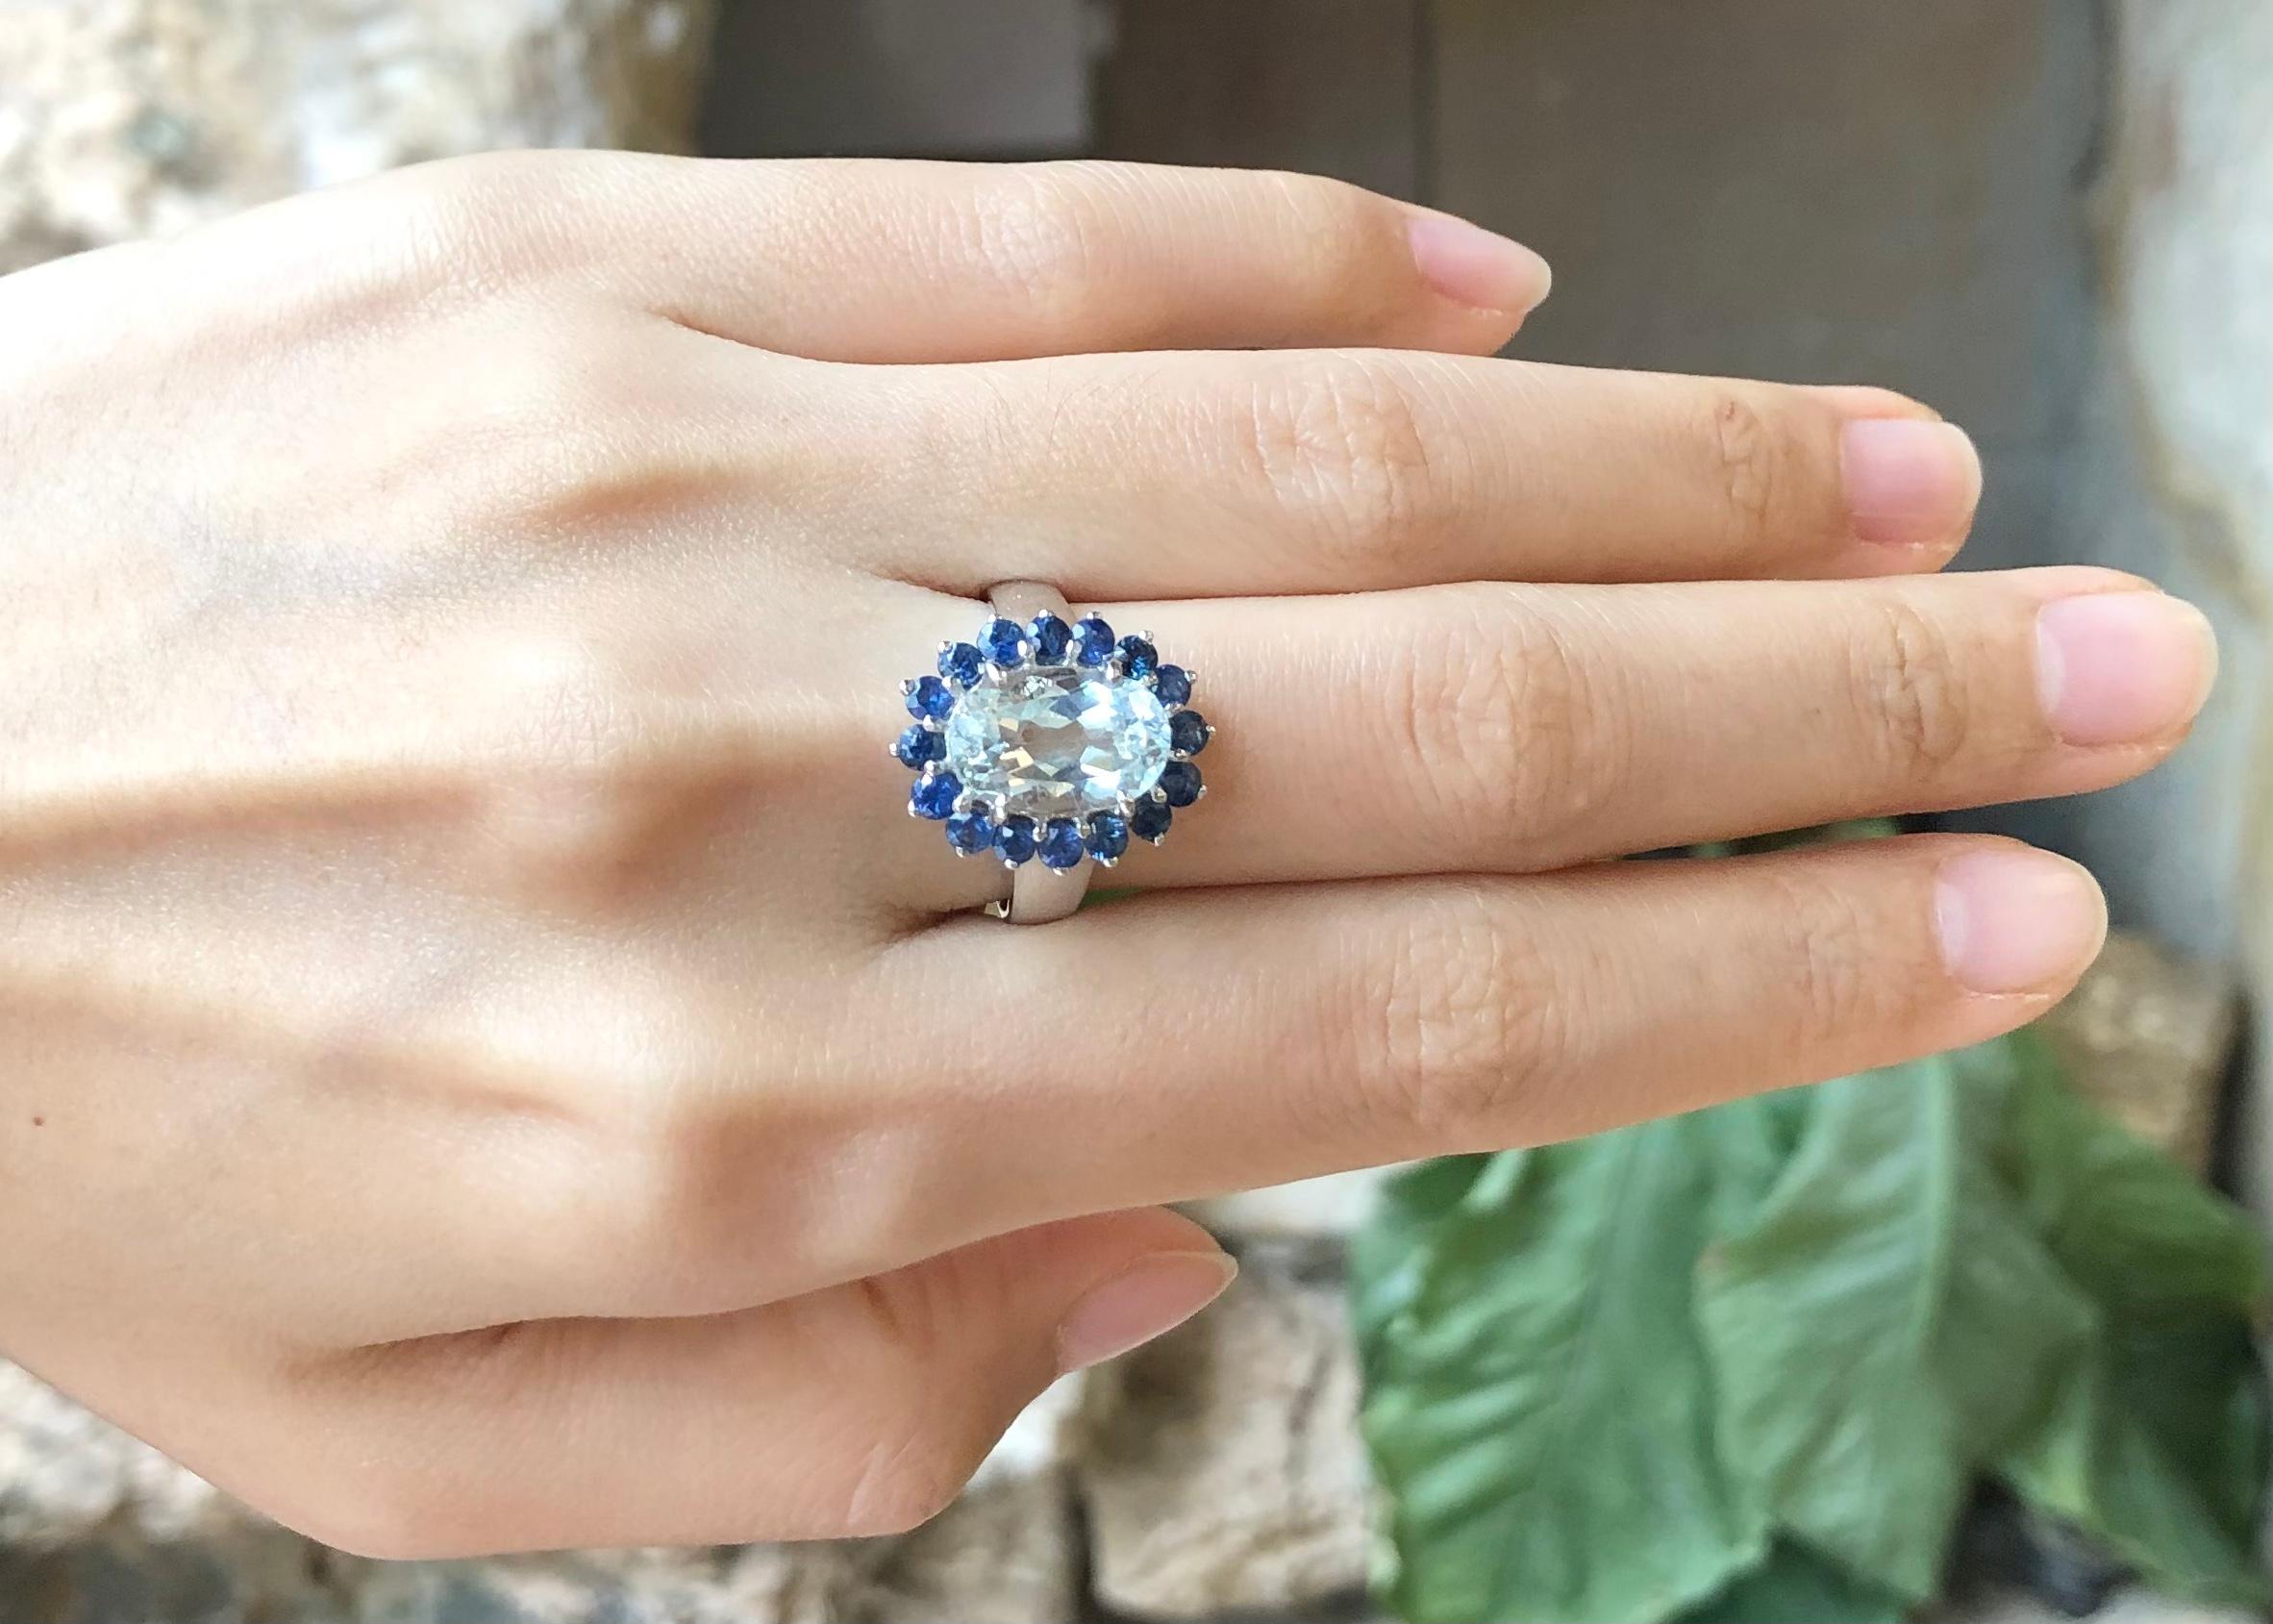 Aquamarine with Blue Sapphire Ring set in Silver Settings

Width:  1.3 cm 
Length: 1.8 cm
Ring Size: 57
Total Weight: 4.21 grams

*Please note that the silver setting is plated with rhodium to promote shine and help prevent oxidation.  However, with